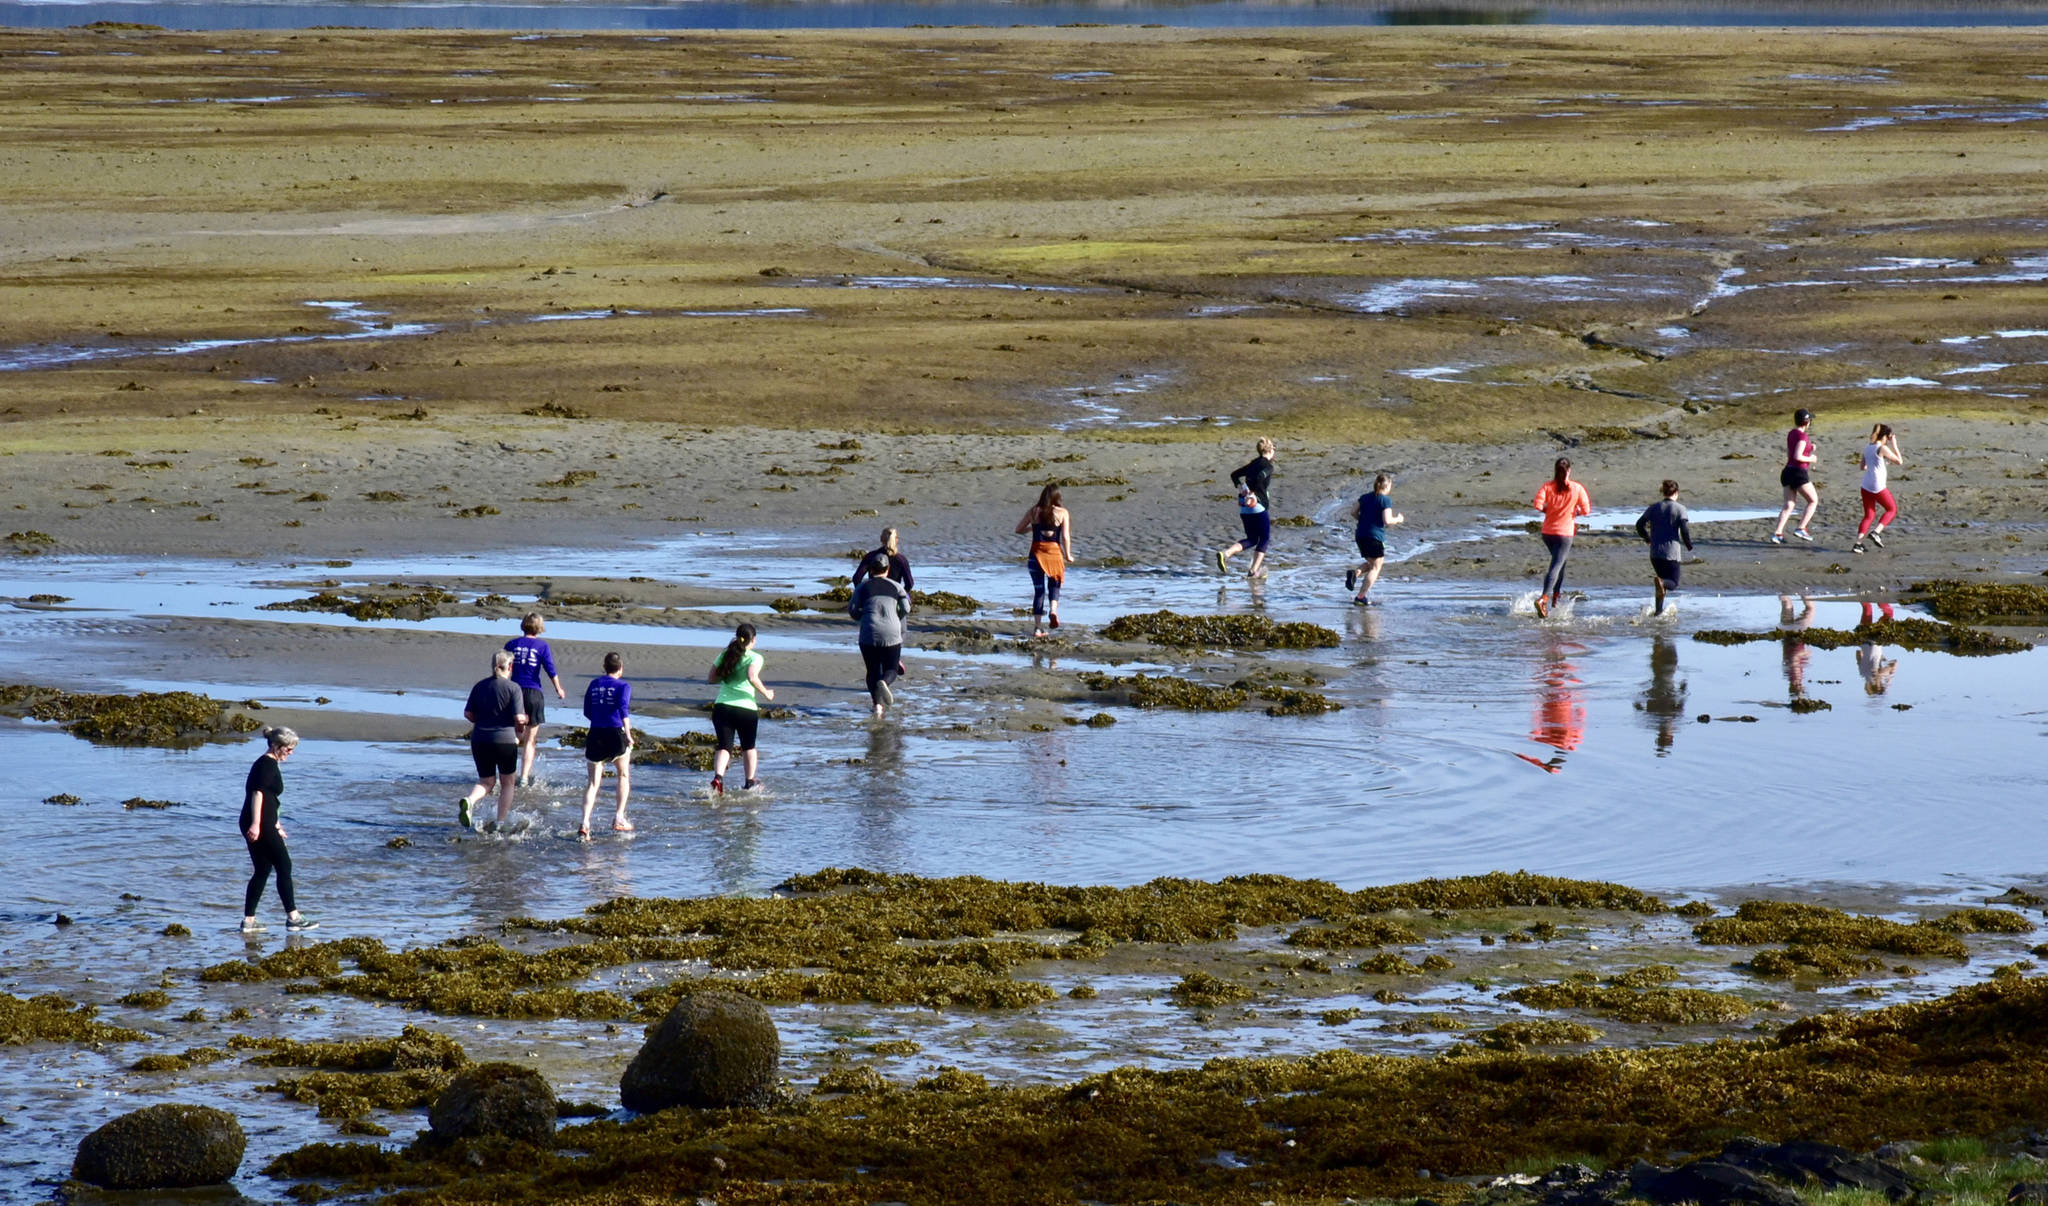 Runners compete in the Spring Tide Scramble at Fish Creek Park in Juneau, Alaska on Sunday, May 19, 2019. (Courtesy Photo | Susan Cable)